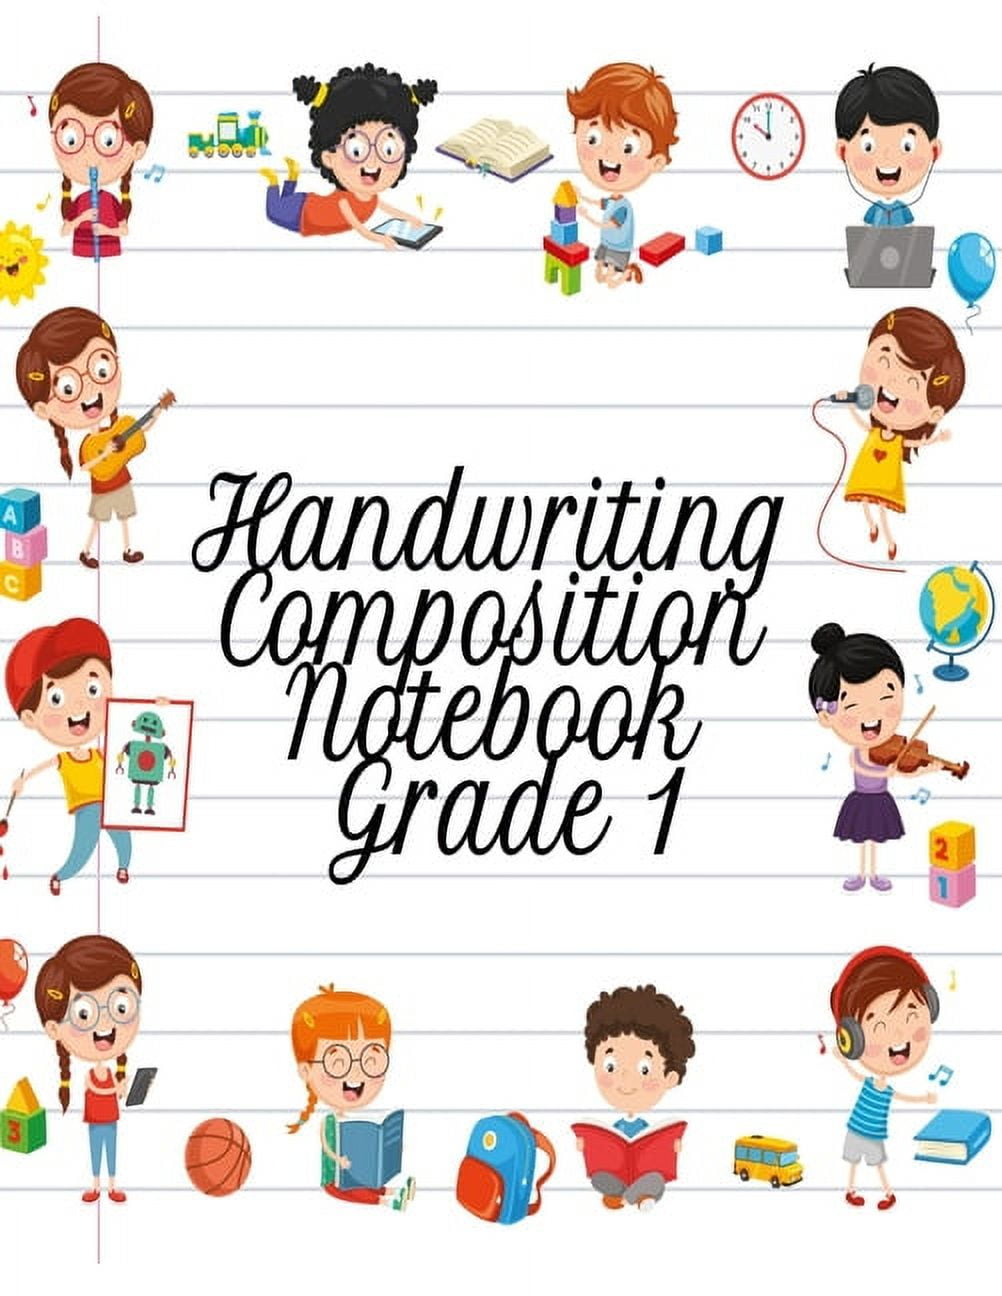 Handwriting Practice Paper ABC: Kindergarten Writing Paper with Dotted  Midline, Primary Composition Notebook, 8.5x11, 100 Pages (Paperback)